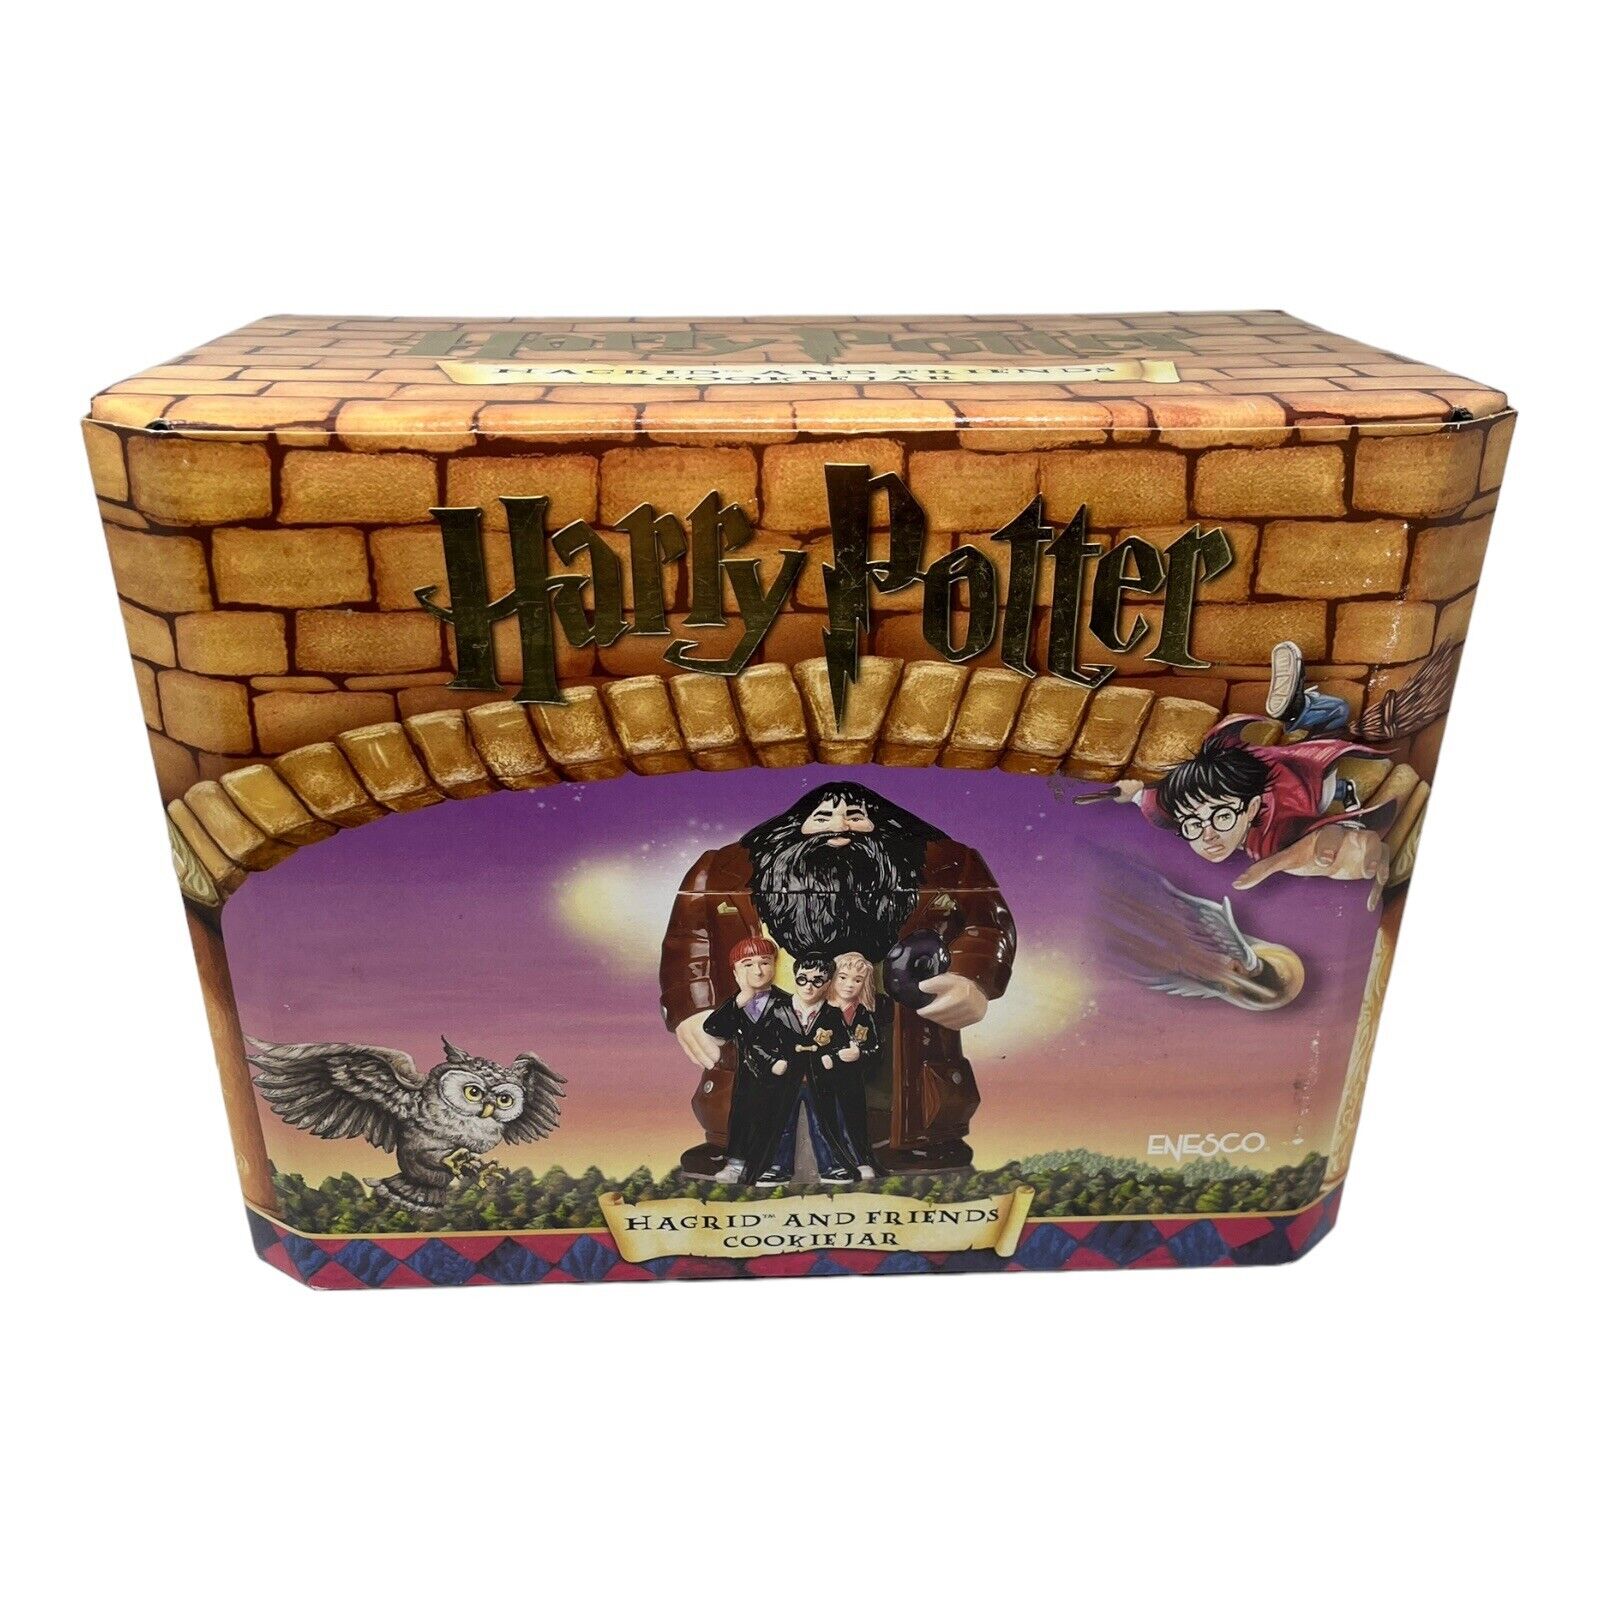 New Unopened Harry Potter Hagrid And Friends Ceramic Cookie Jar Enesco #870560